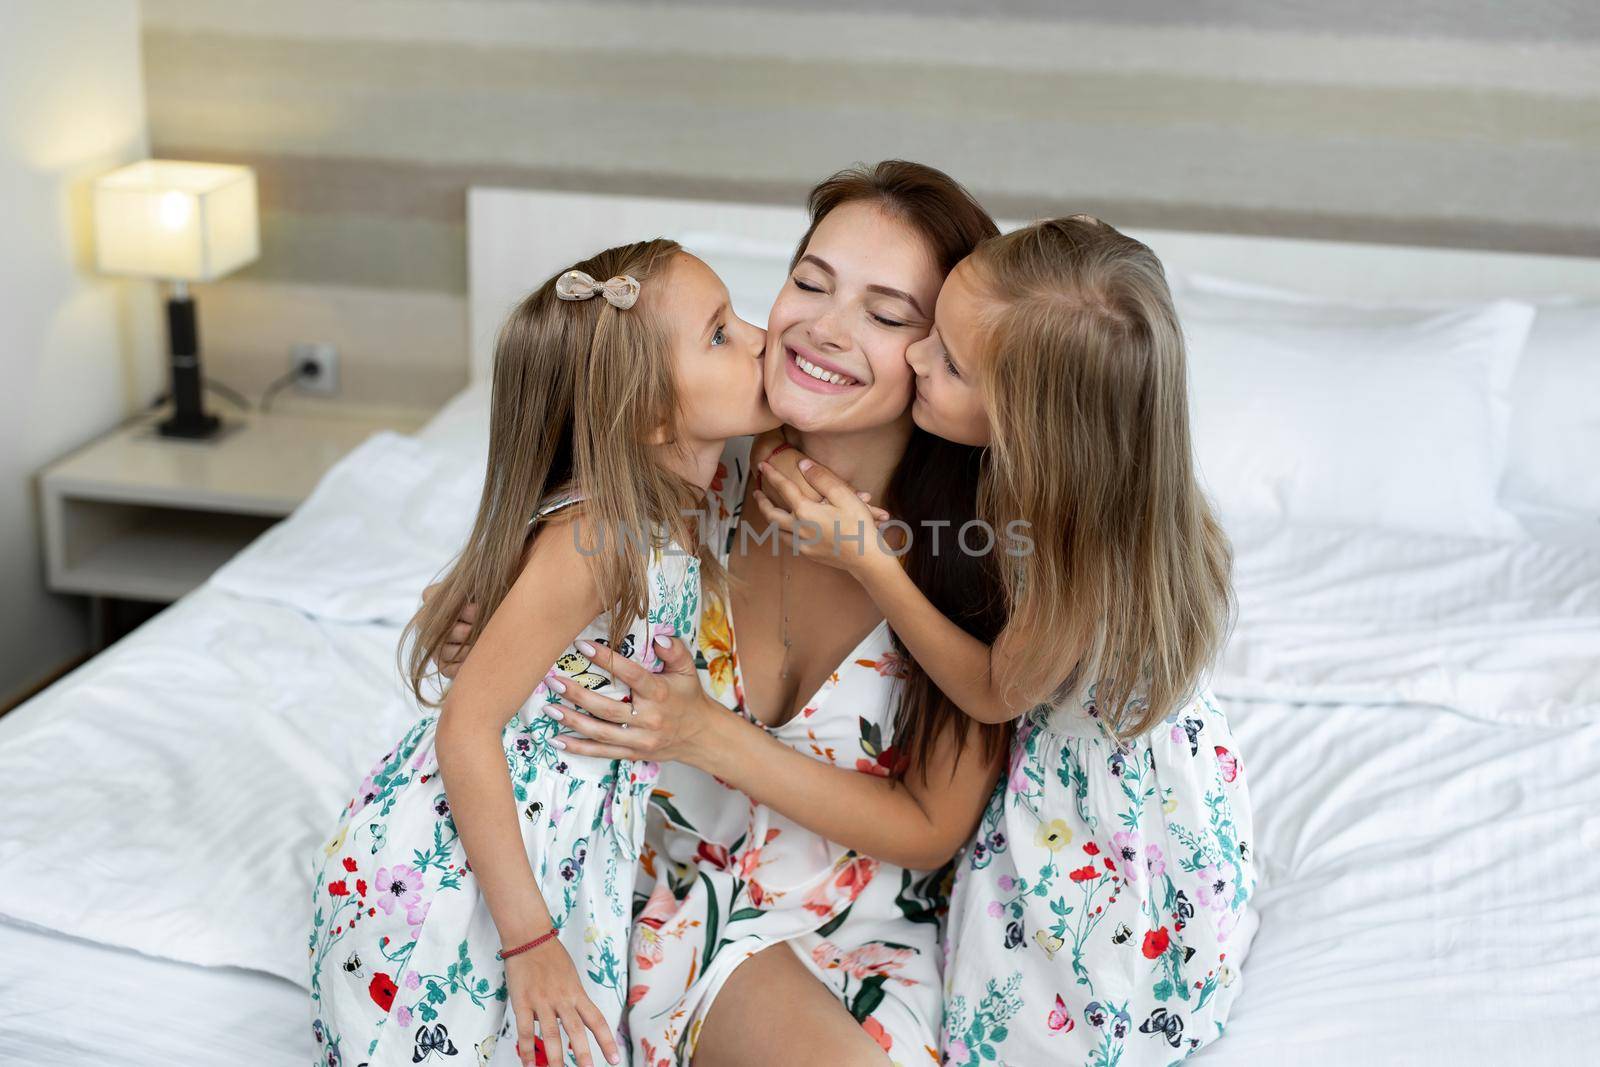 Twin girls kiss their mom in a hotel room